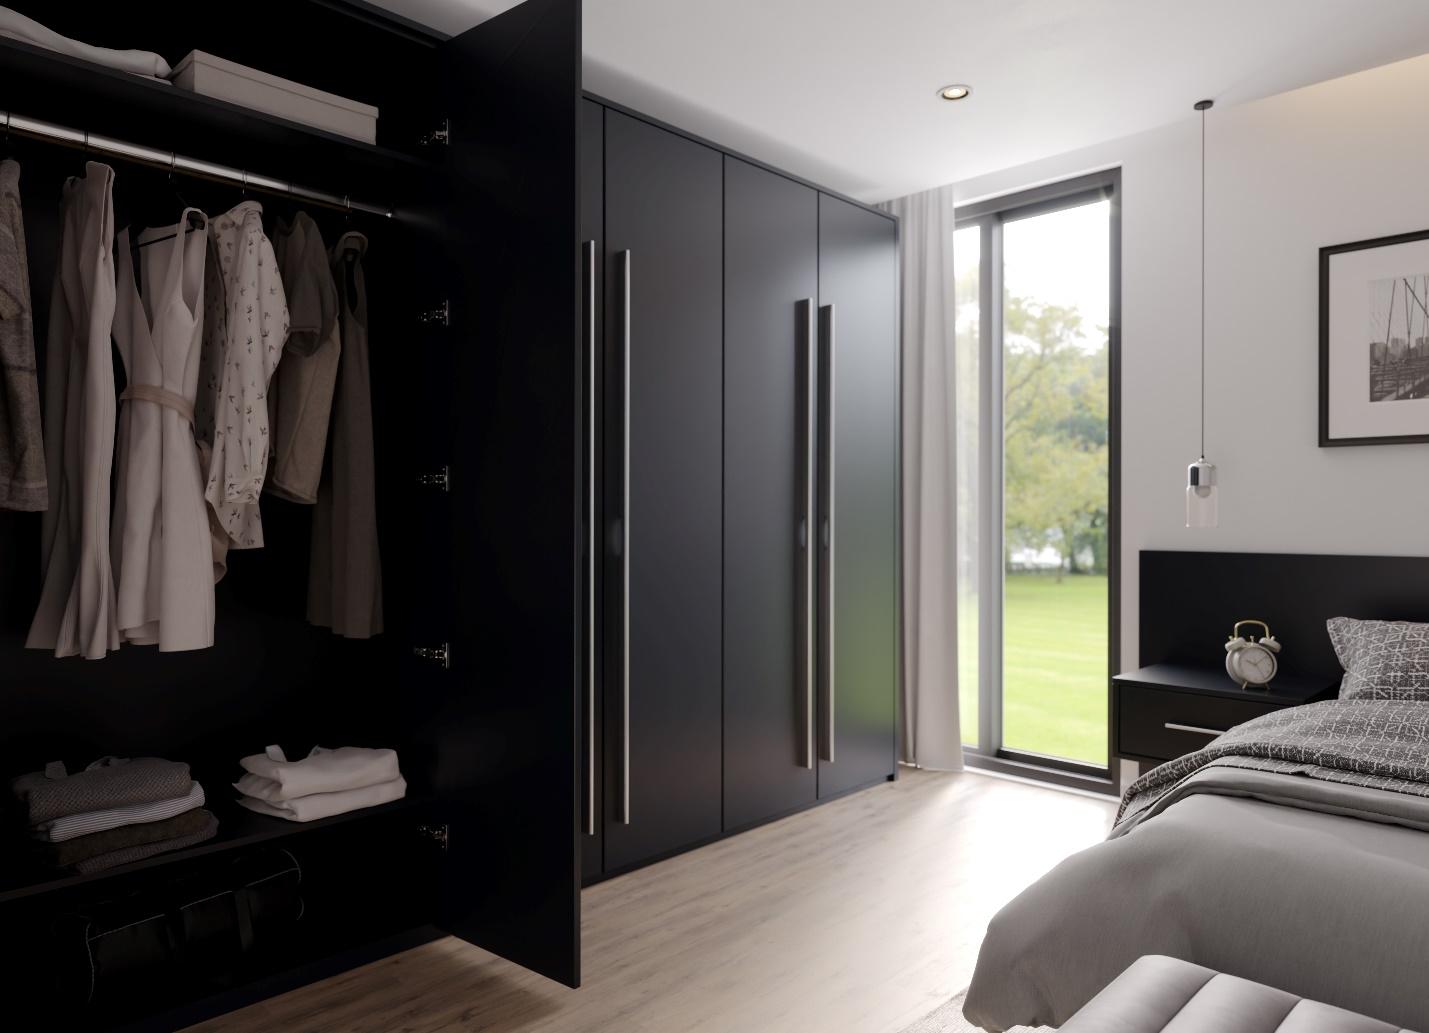 A room with black cabinets and a bed

Description automatically generated